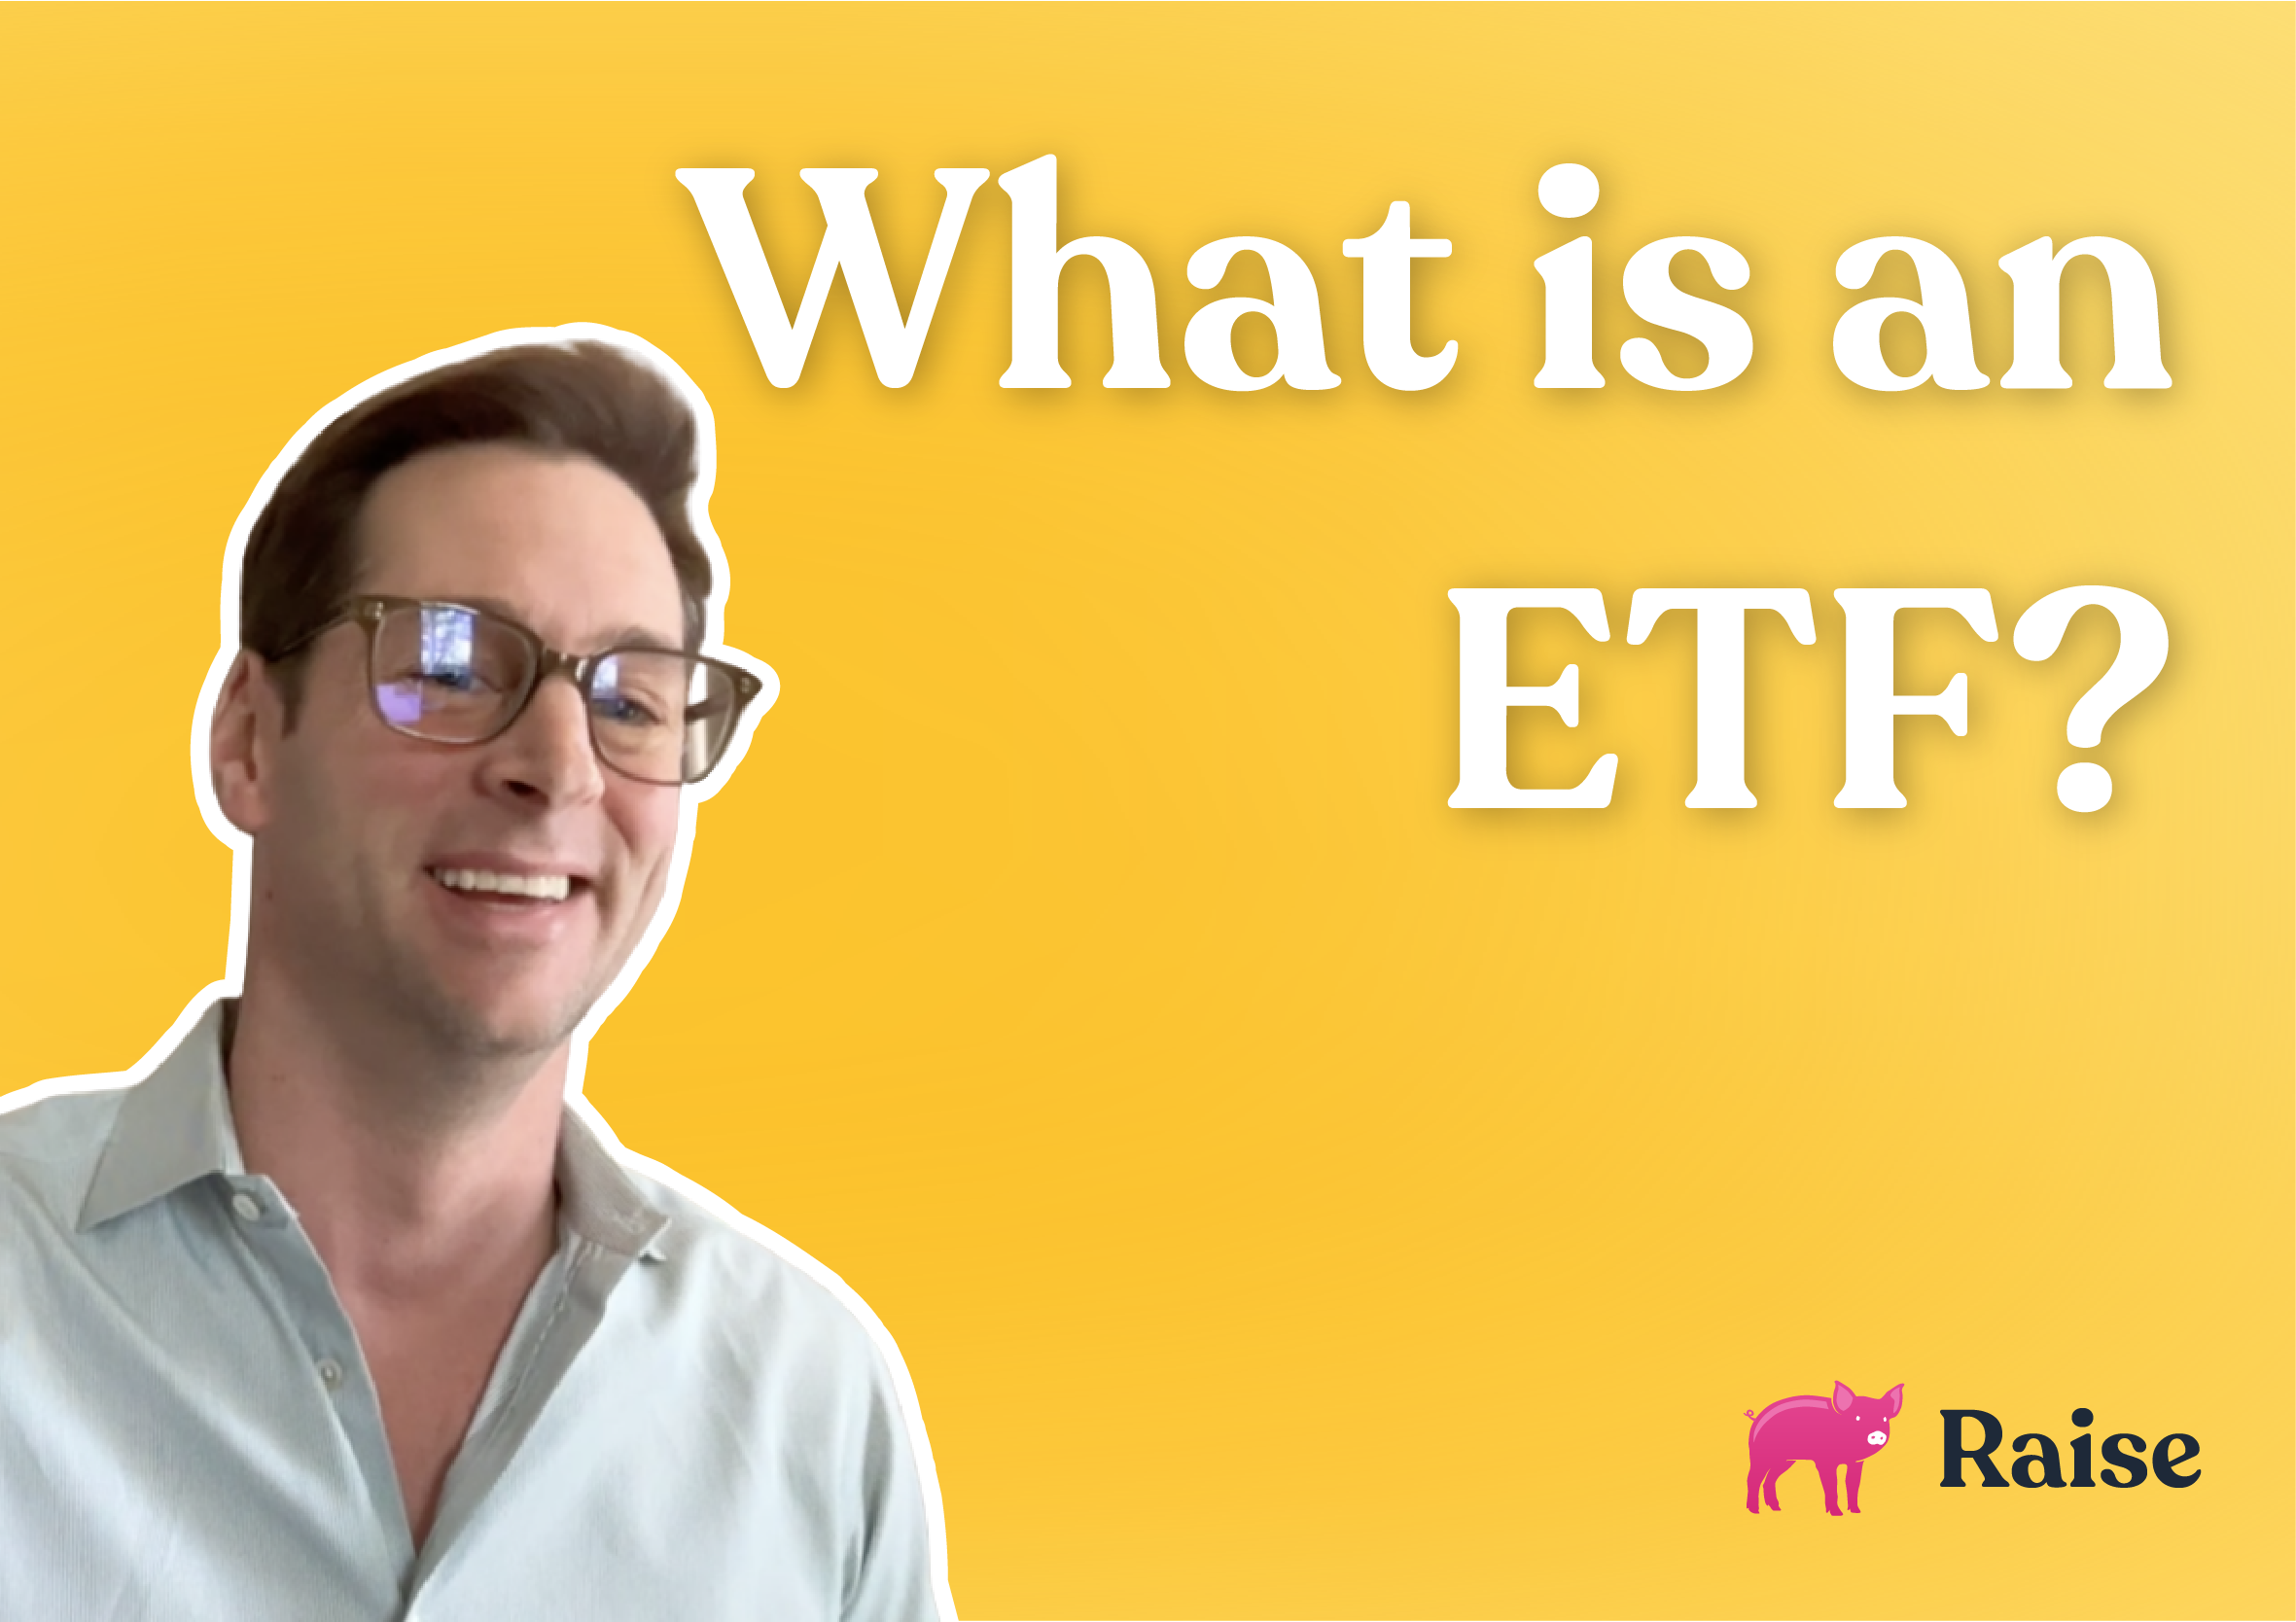 What is an ETF?